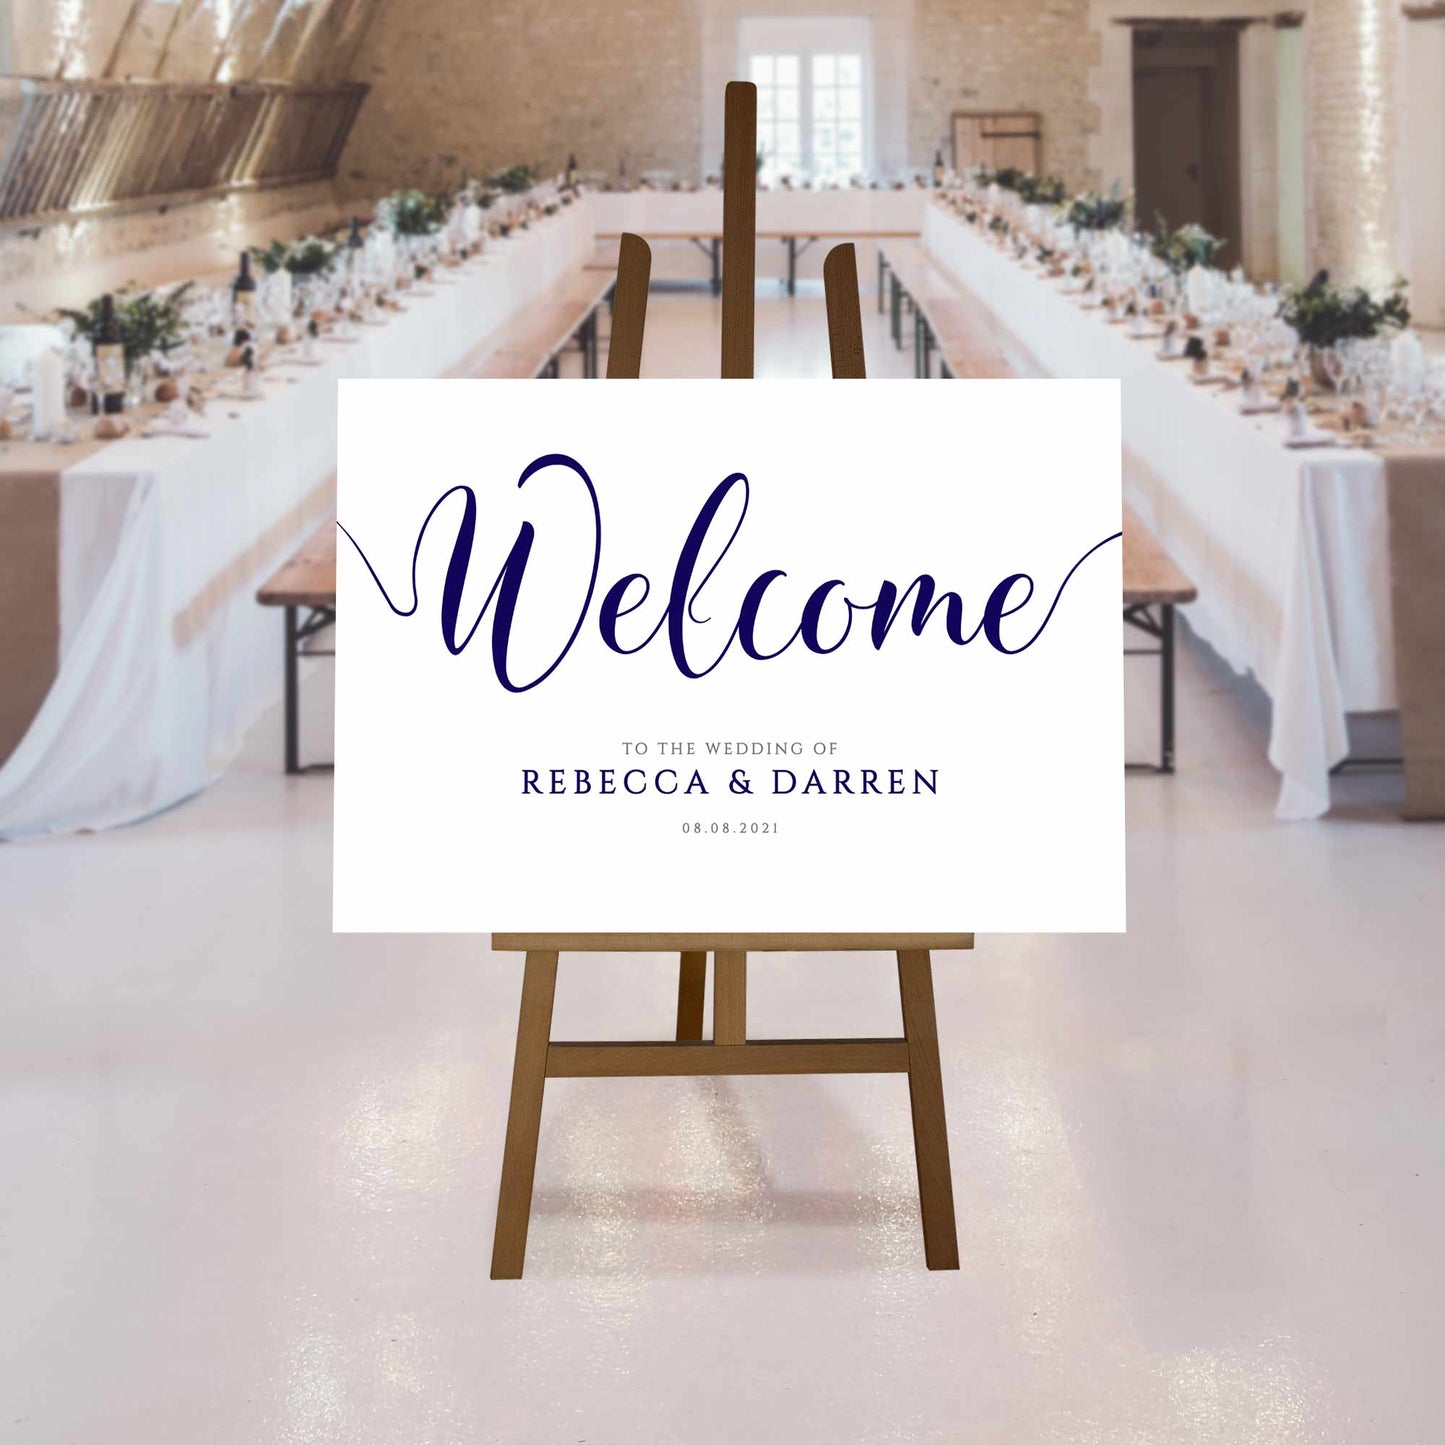 navy wedding welcome sign at a rustic wedding reception